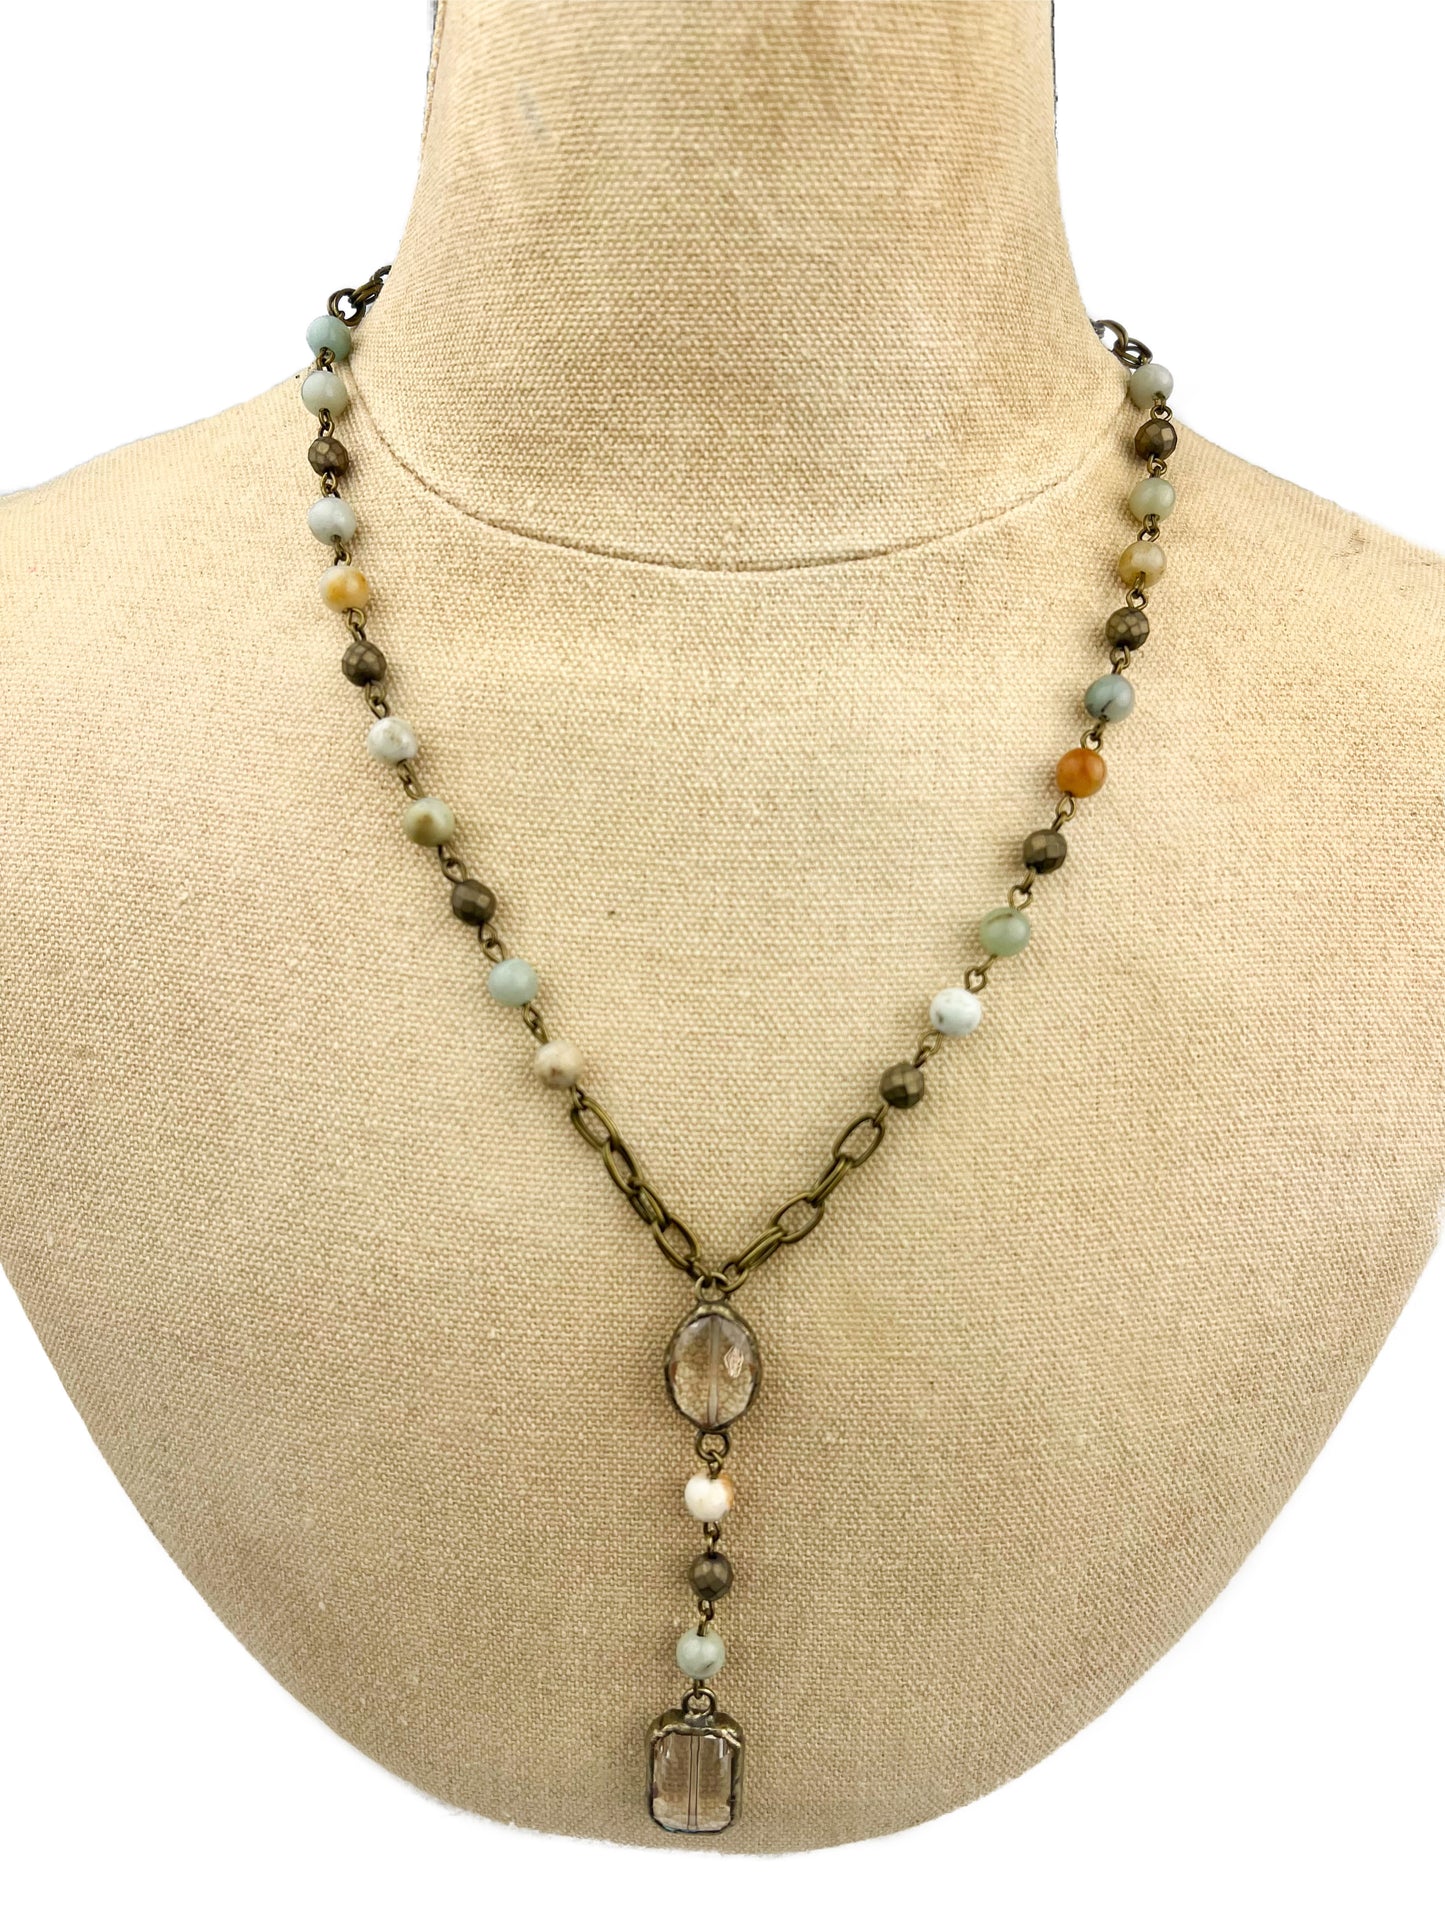 18" - 20" Amazonite Necklace with Round and Square Pendants